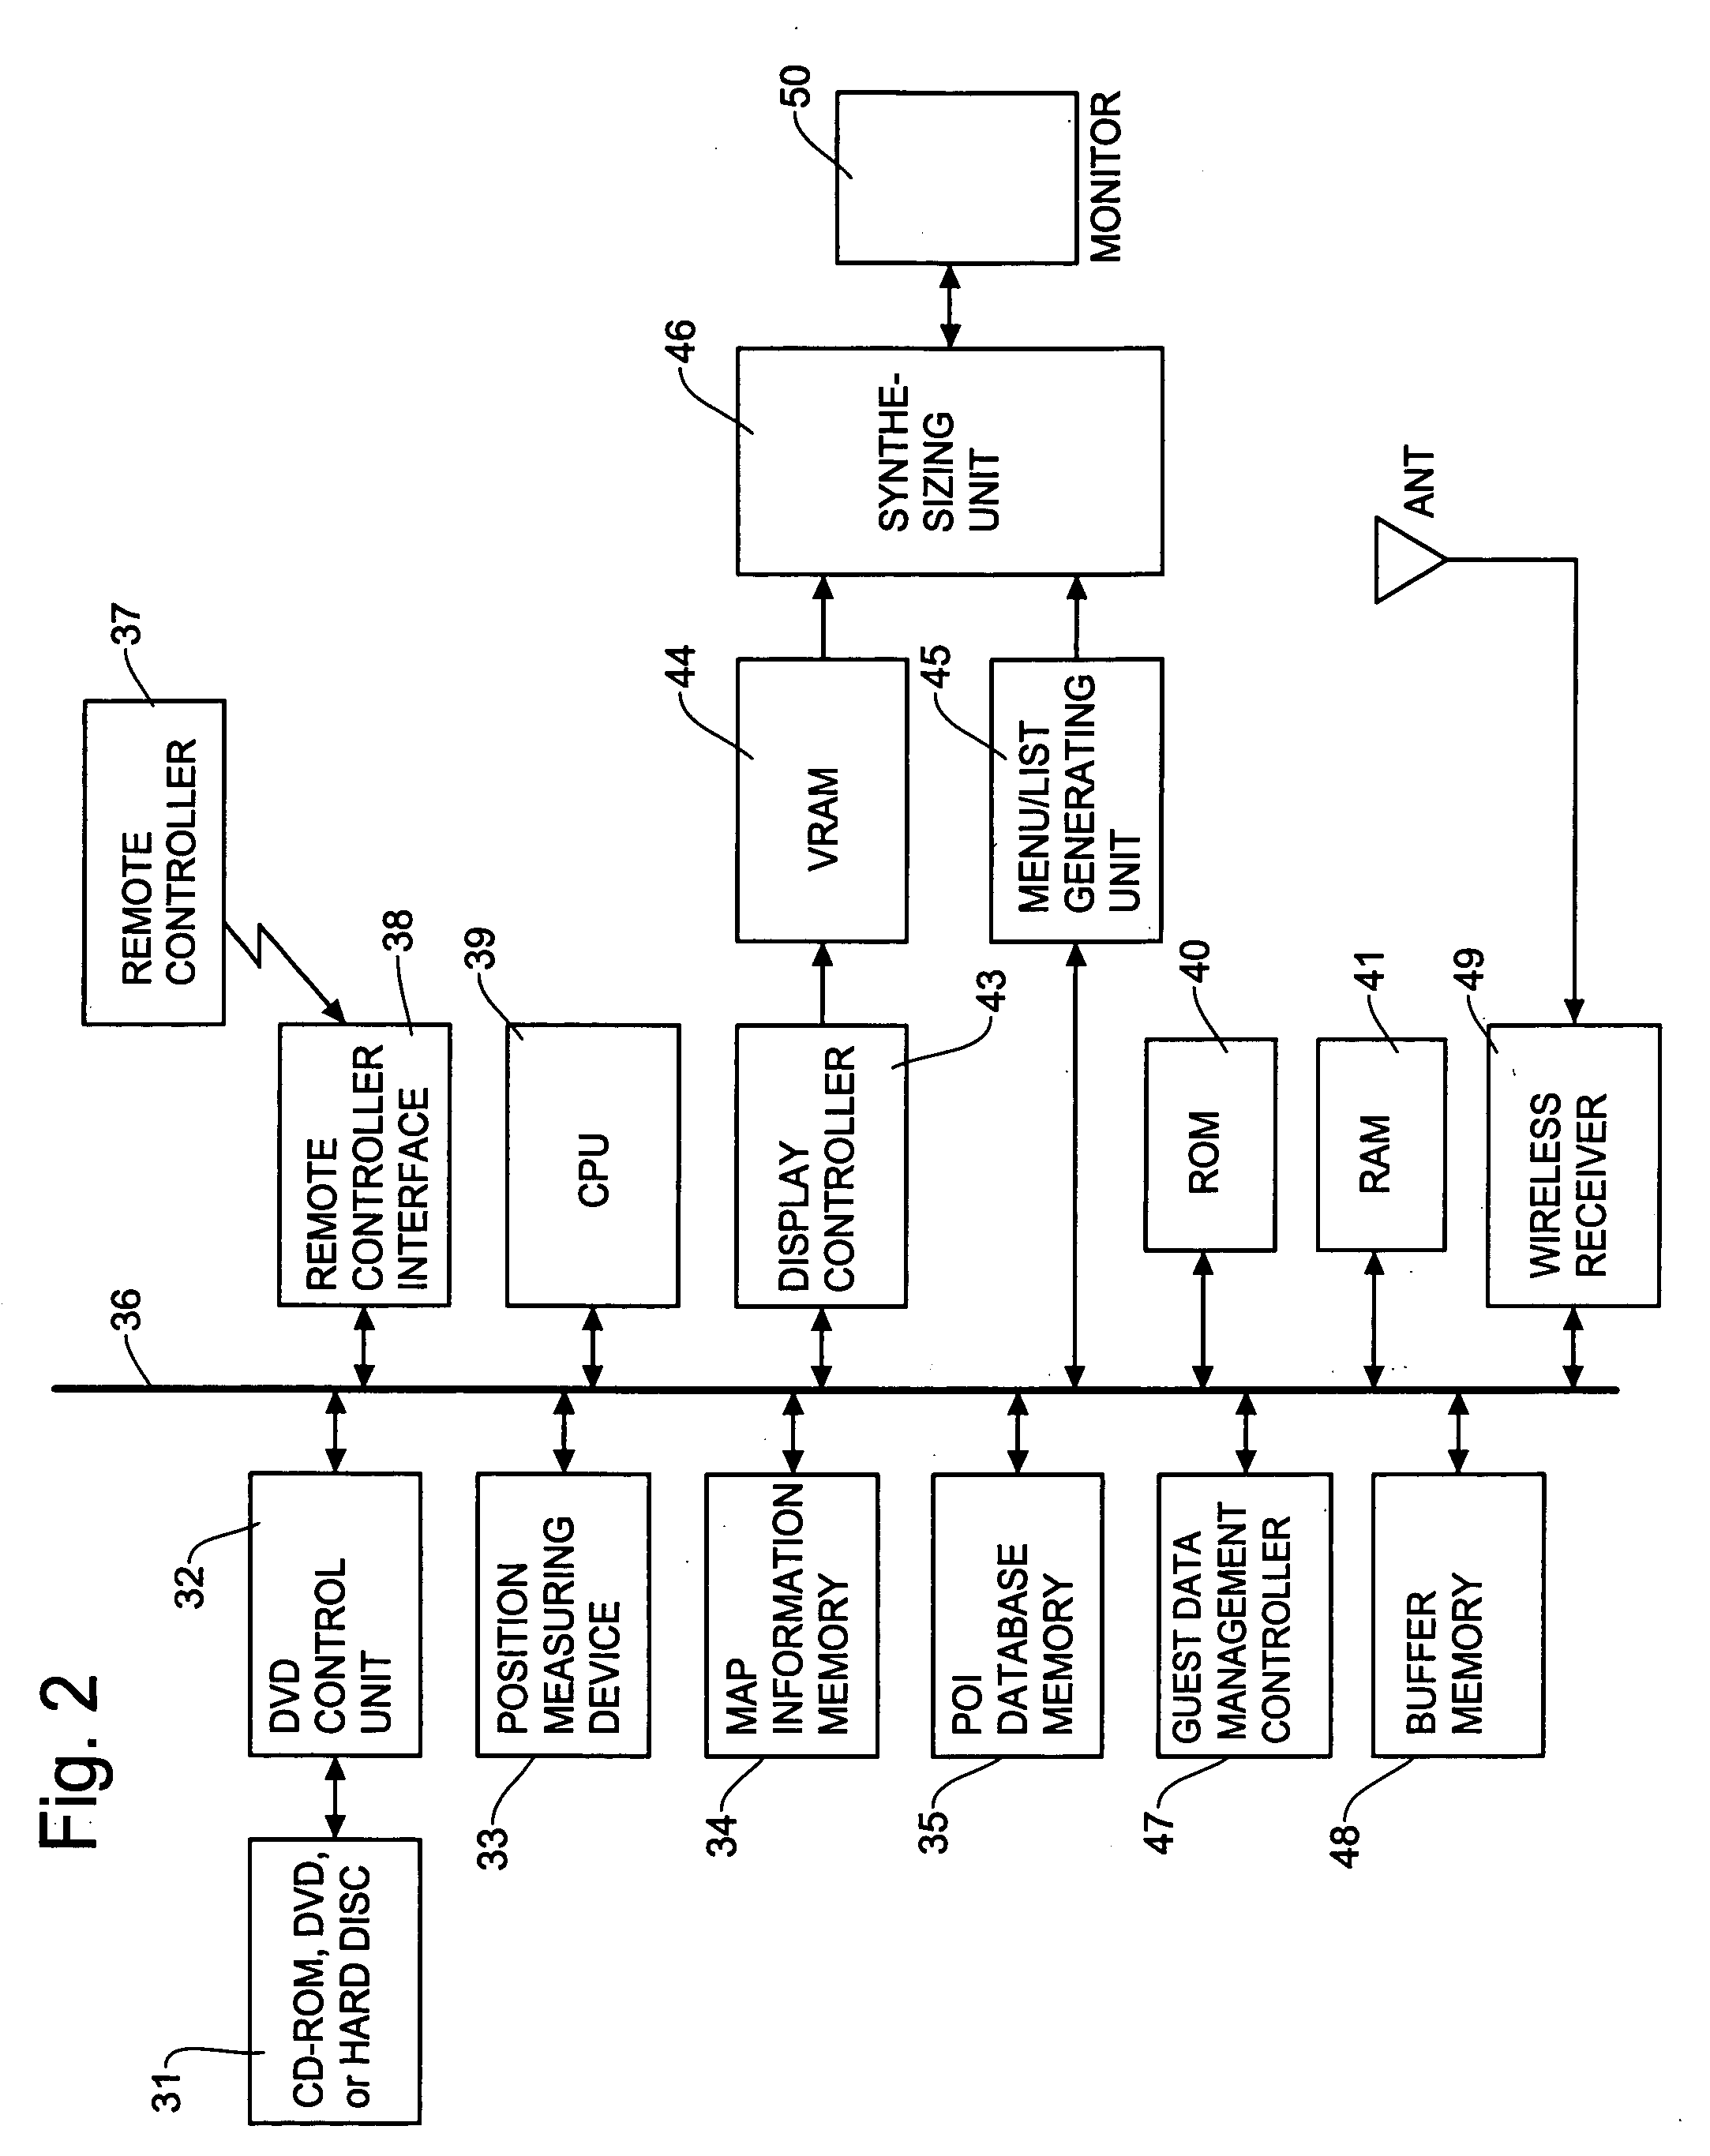 Guest data management method and apparatus for navigation system